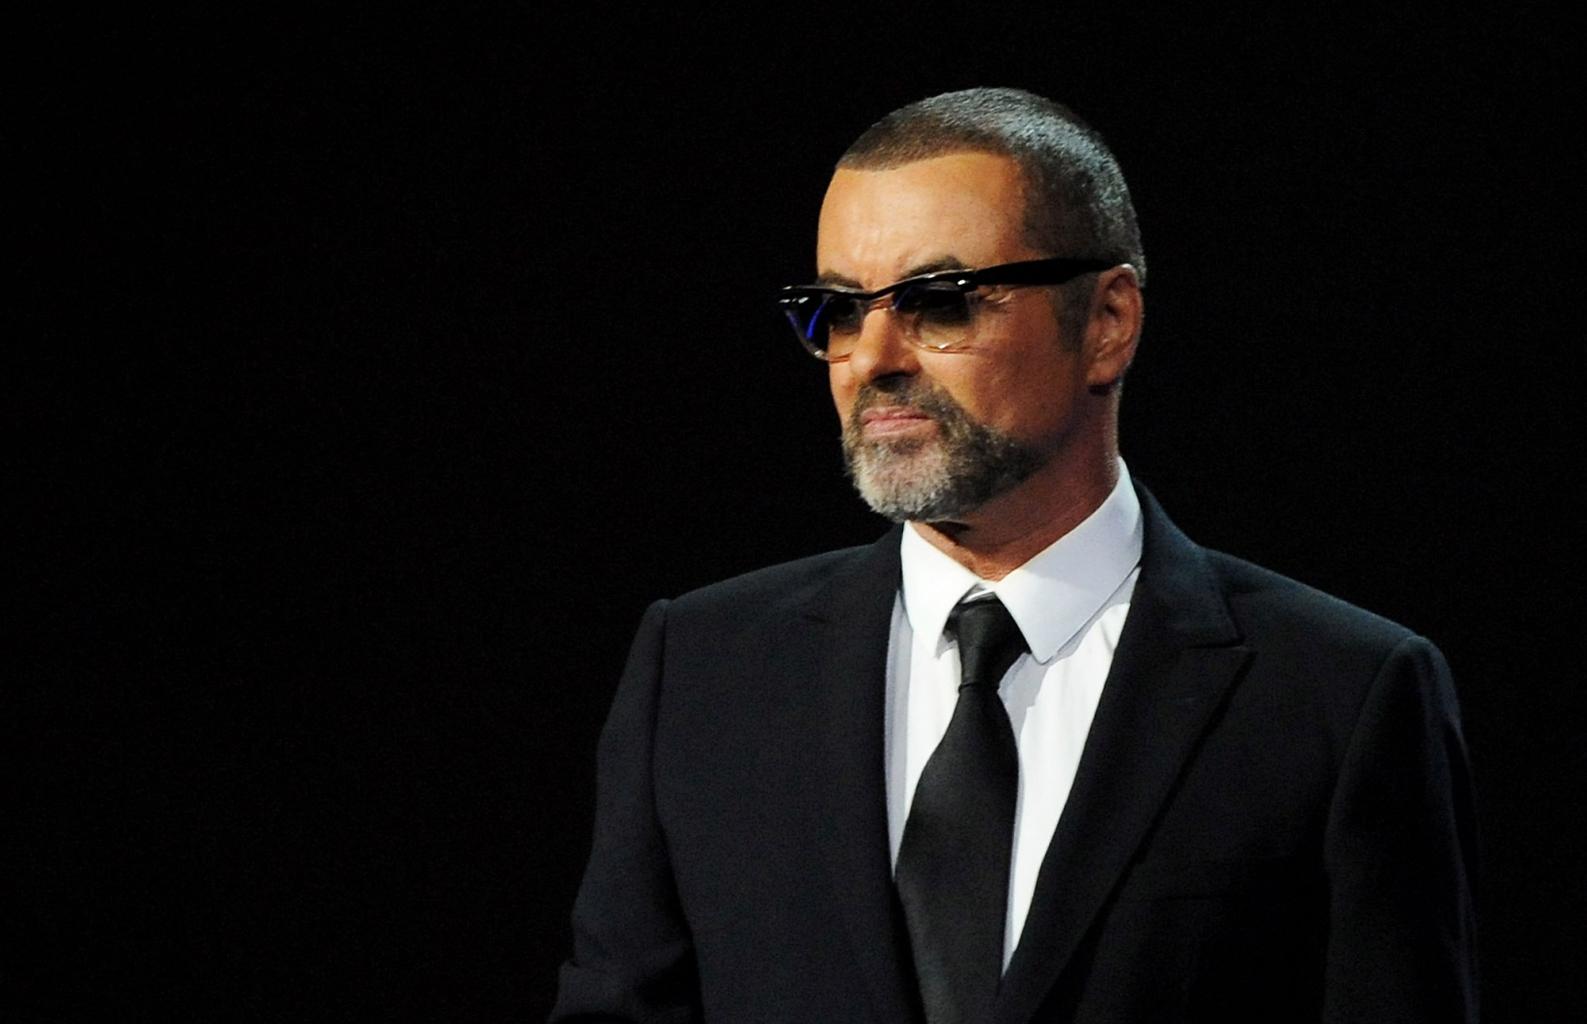 â€˜Hard Drugs Had Been Back in His Lifeâ€™: George Michaelâ€™s Cousin Claims His Death Was Linked to a Drug Overdose